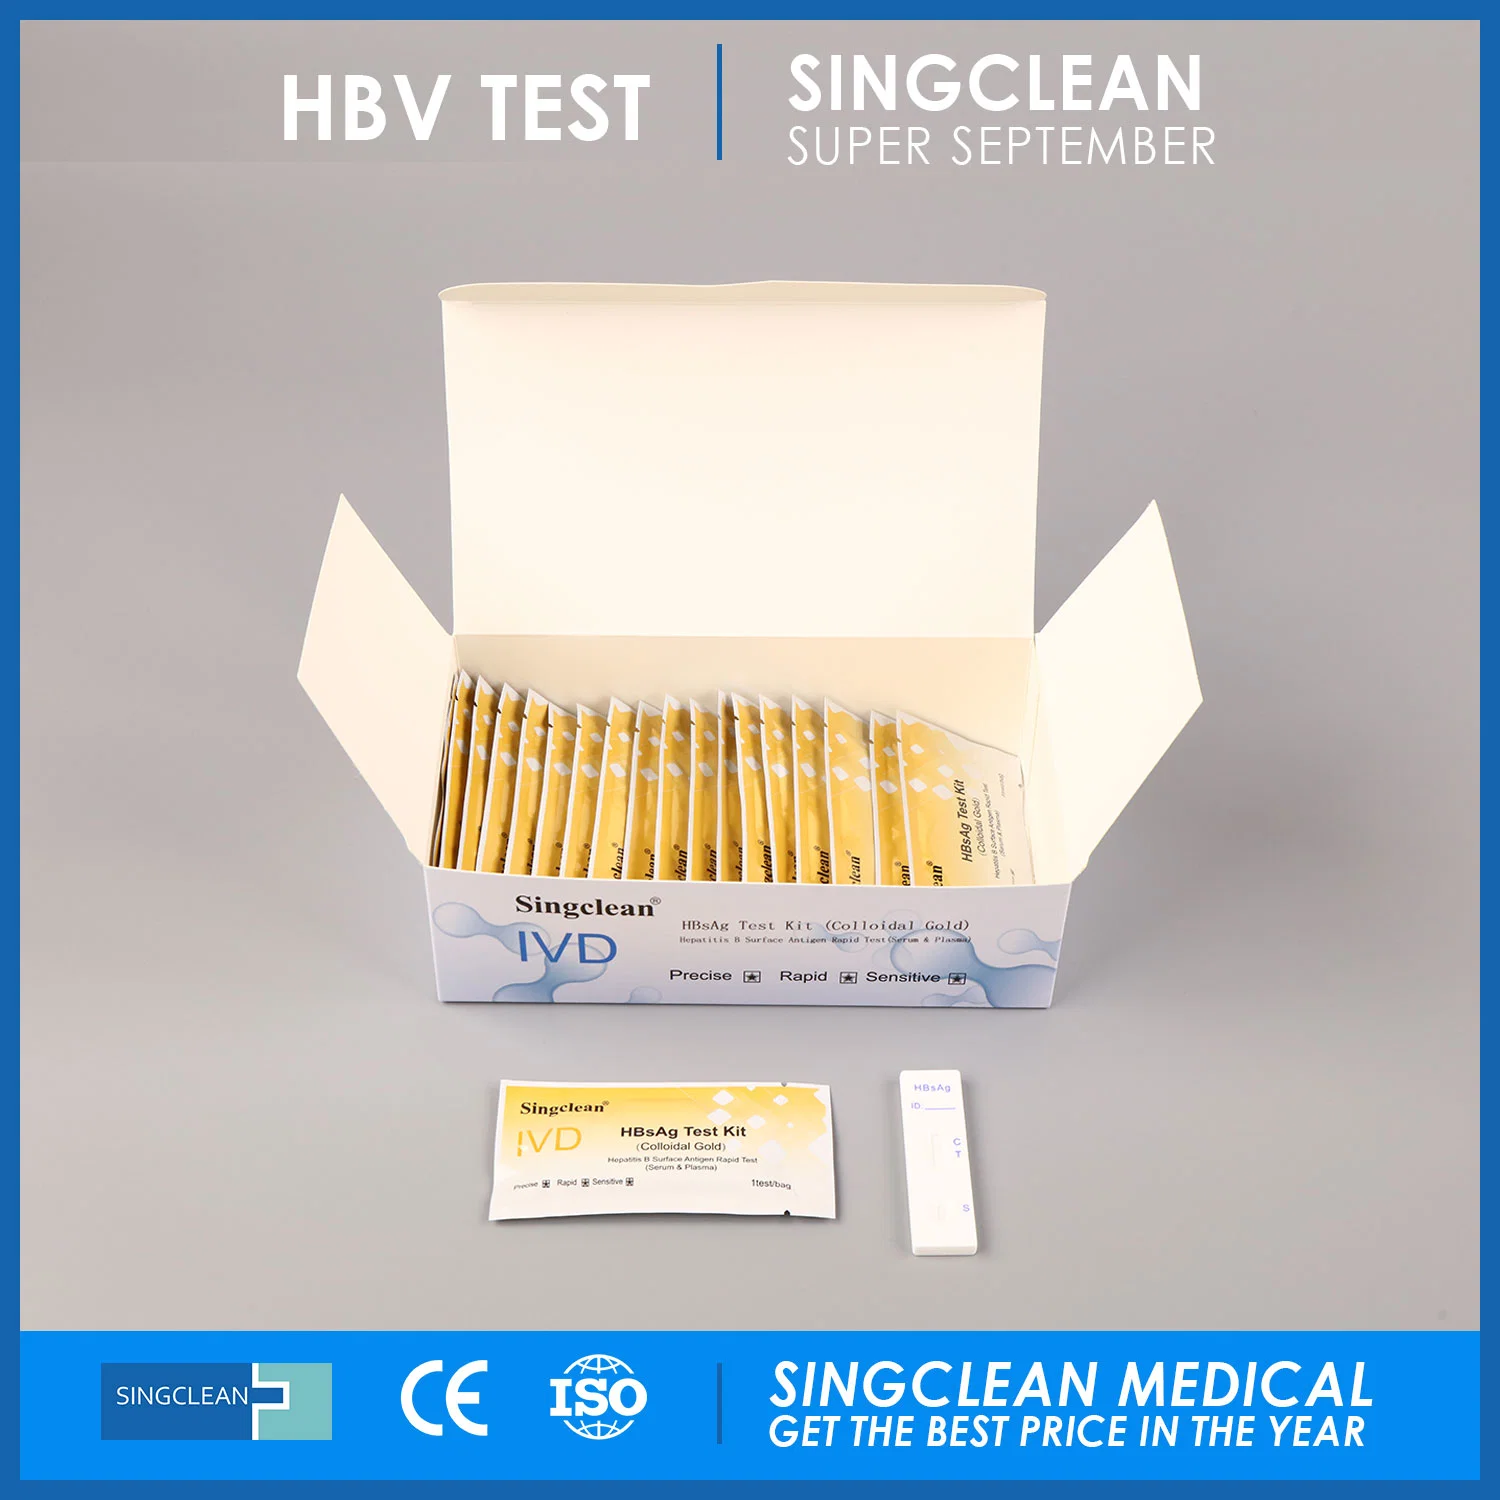 Singclean Wholesale CE Approved Ivd Rapid Human Serum and Plasma HBV Hepatitis B Hbsag Virus Medical Test Kit (Colloidal Gold) for HBV Infection